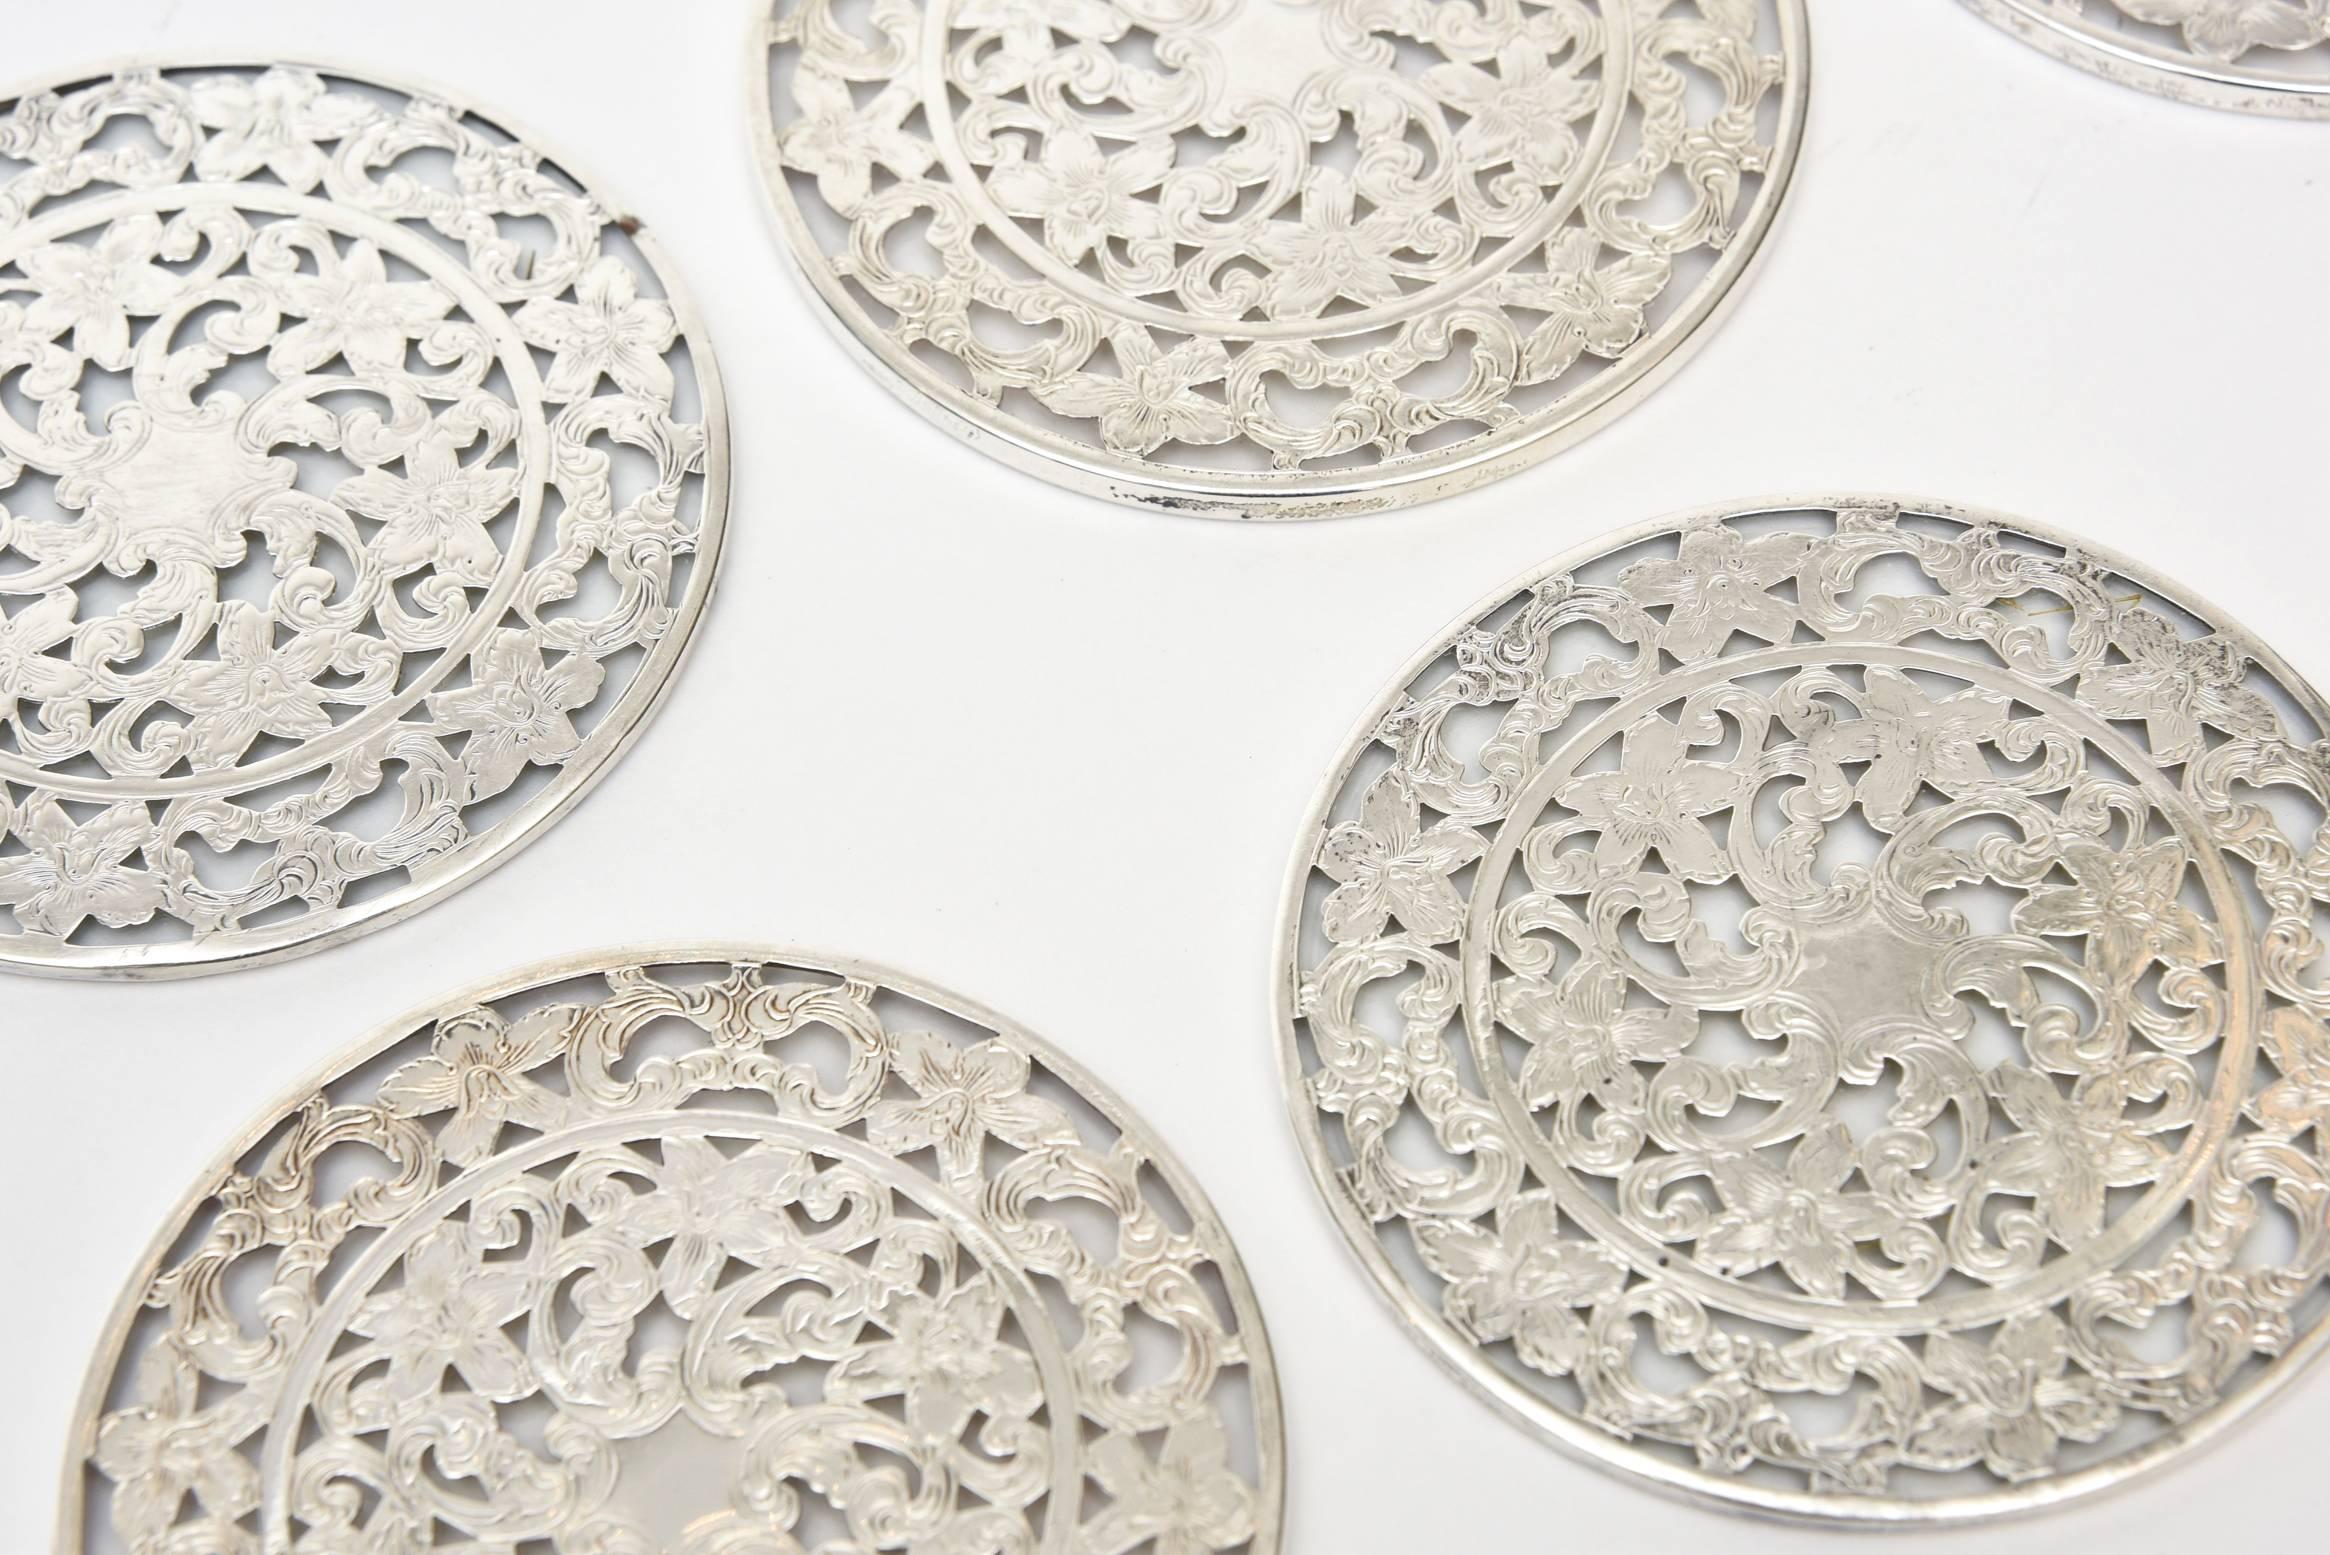 These elegant coasters are a set of six hallmarked sterling silver over glass.
They are from the 1940s and are marked Webster Sterling and in parenthesis 
WCO. Perfect for your special dinner parties.
They have a 1940s meets Art Deco look.

NOTE: